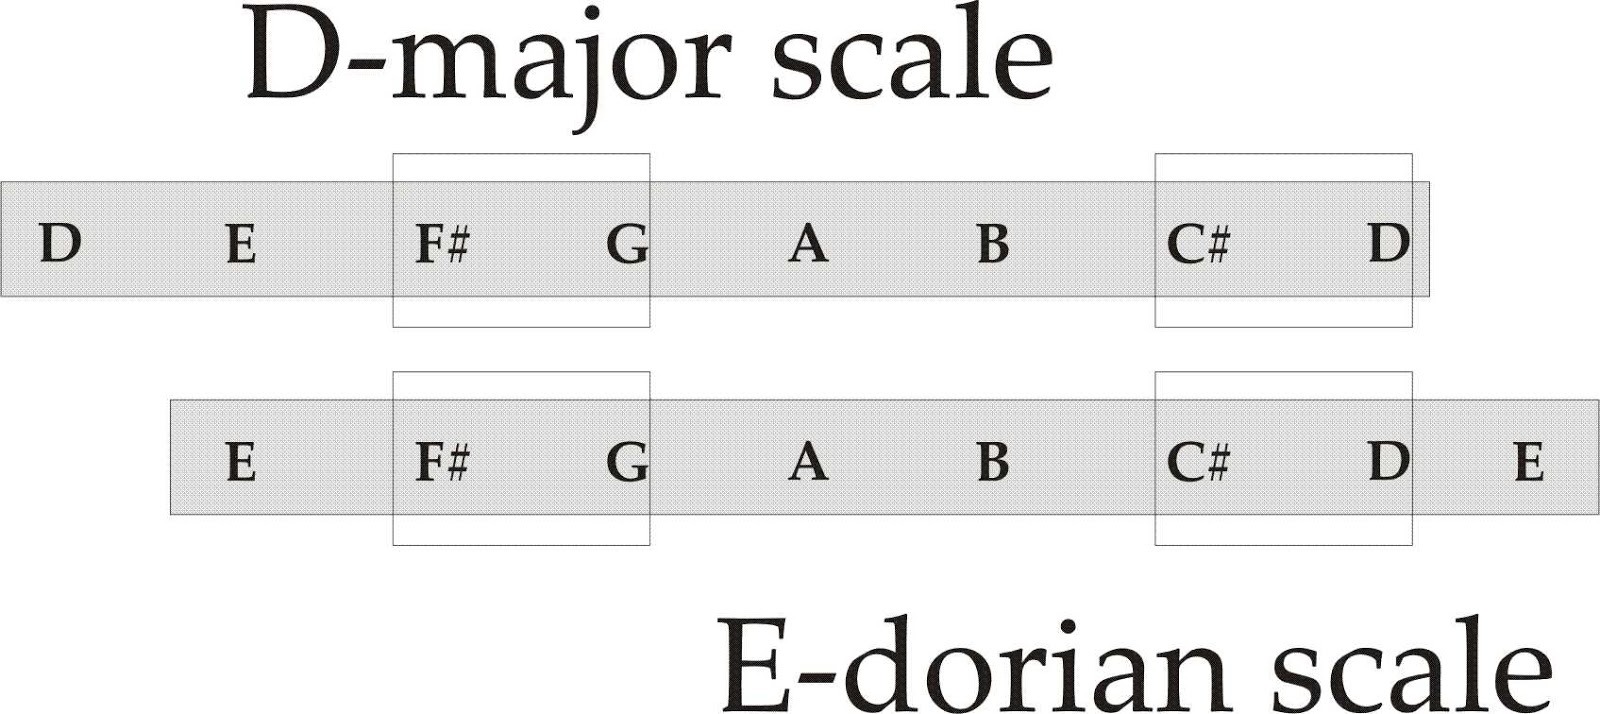 Here are the diatonic chords of the E-dorian scale: